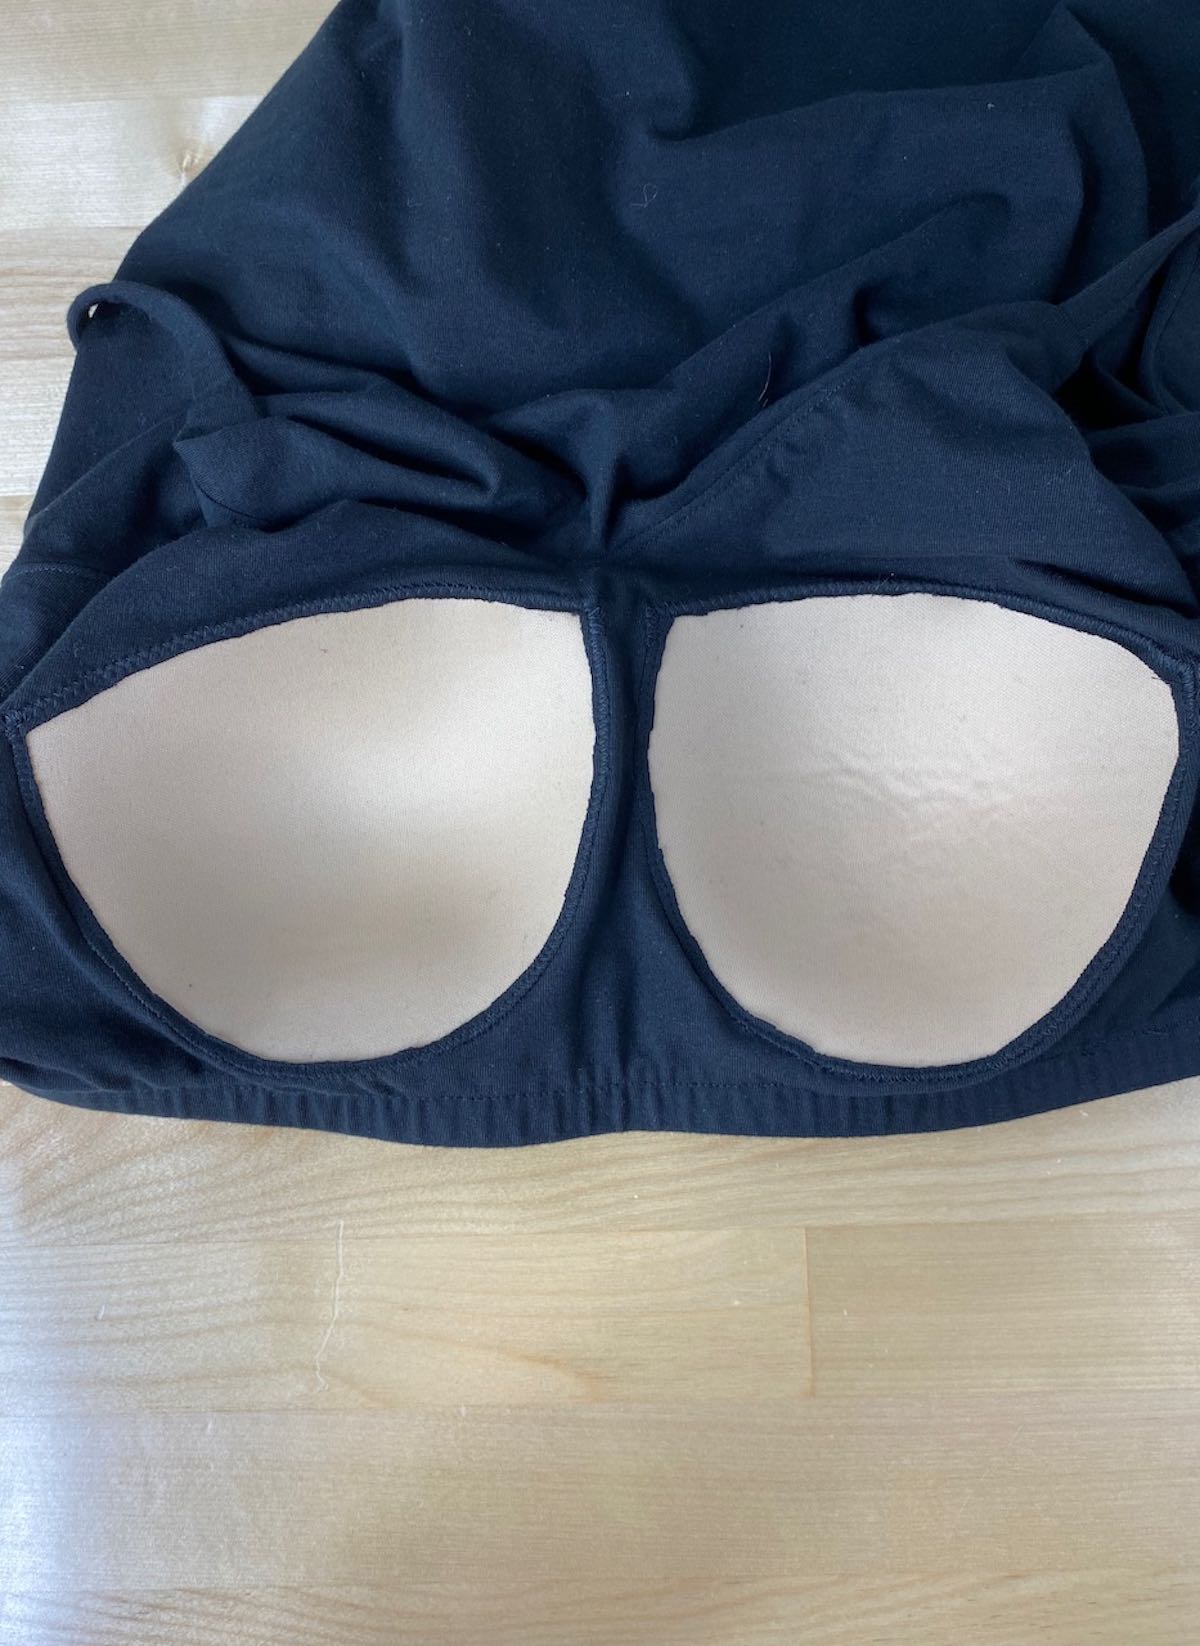 How to Sew a Built-In Bra (With Cups!)  Diy fashion, Diy clothes, Diy  clothing